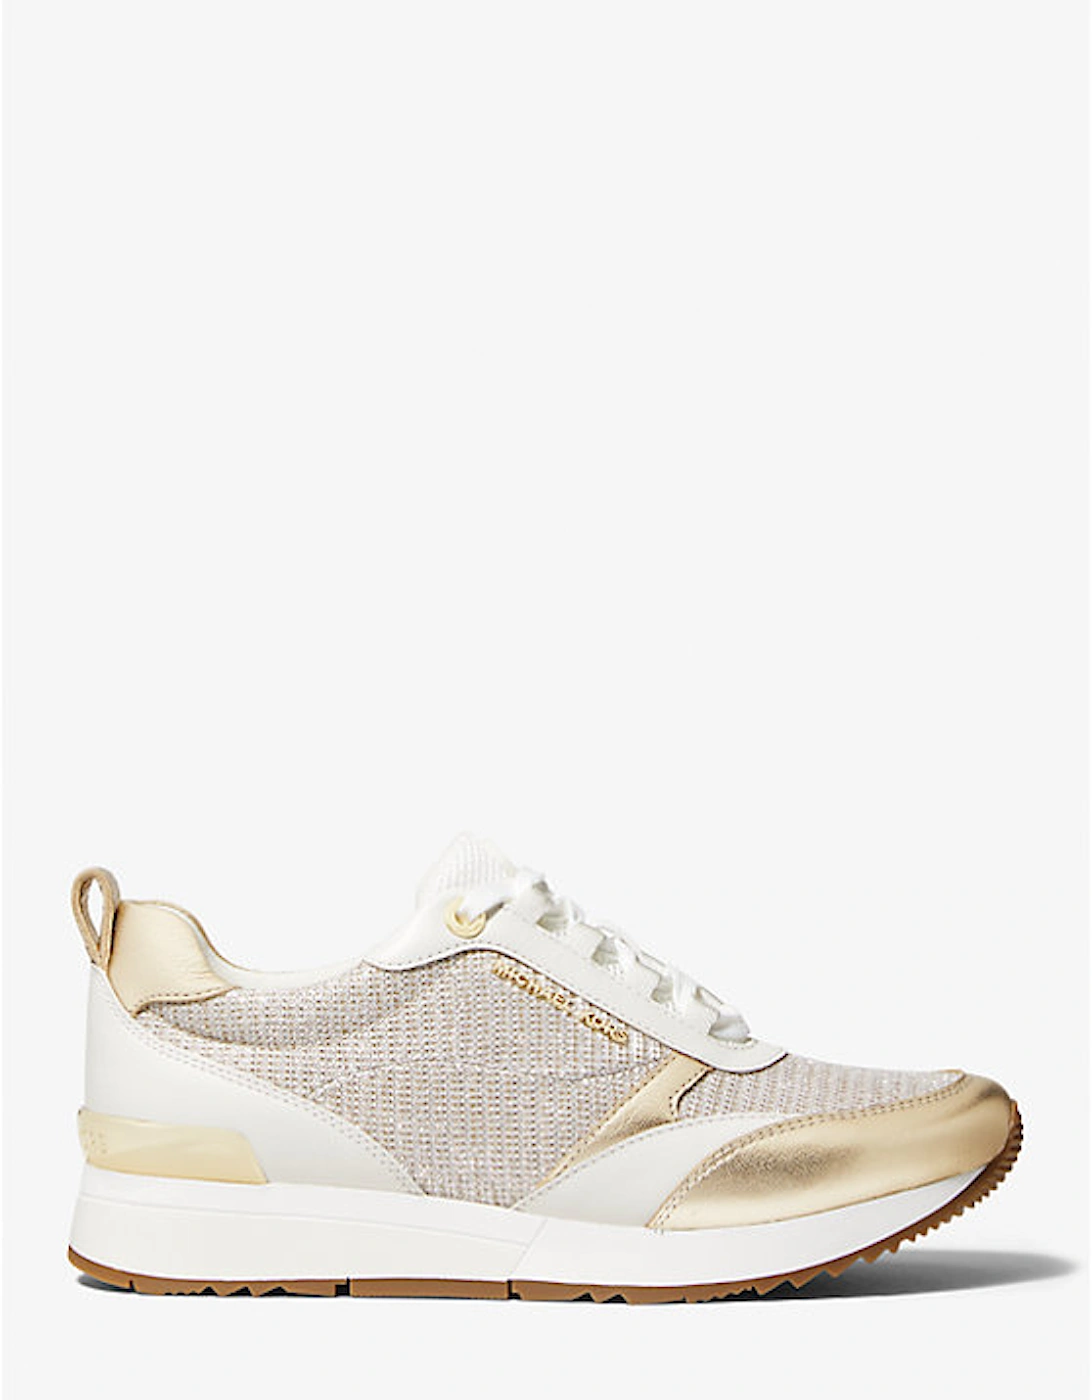 Allie Stride Leather and Glitter Chain-Mesh Trainer